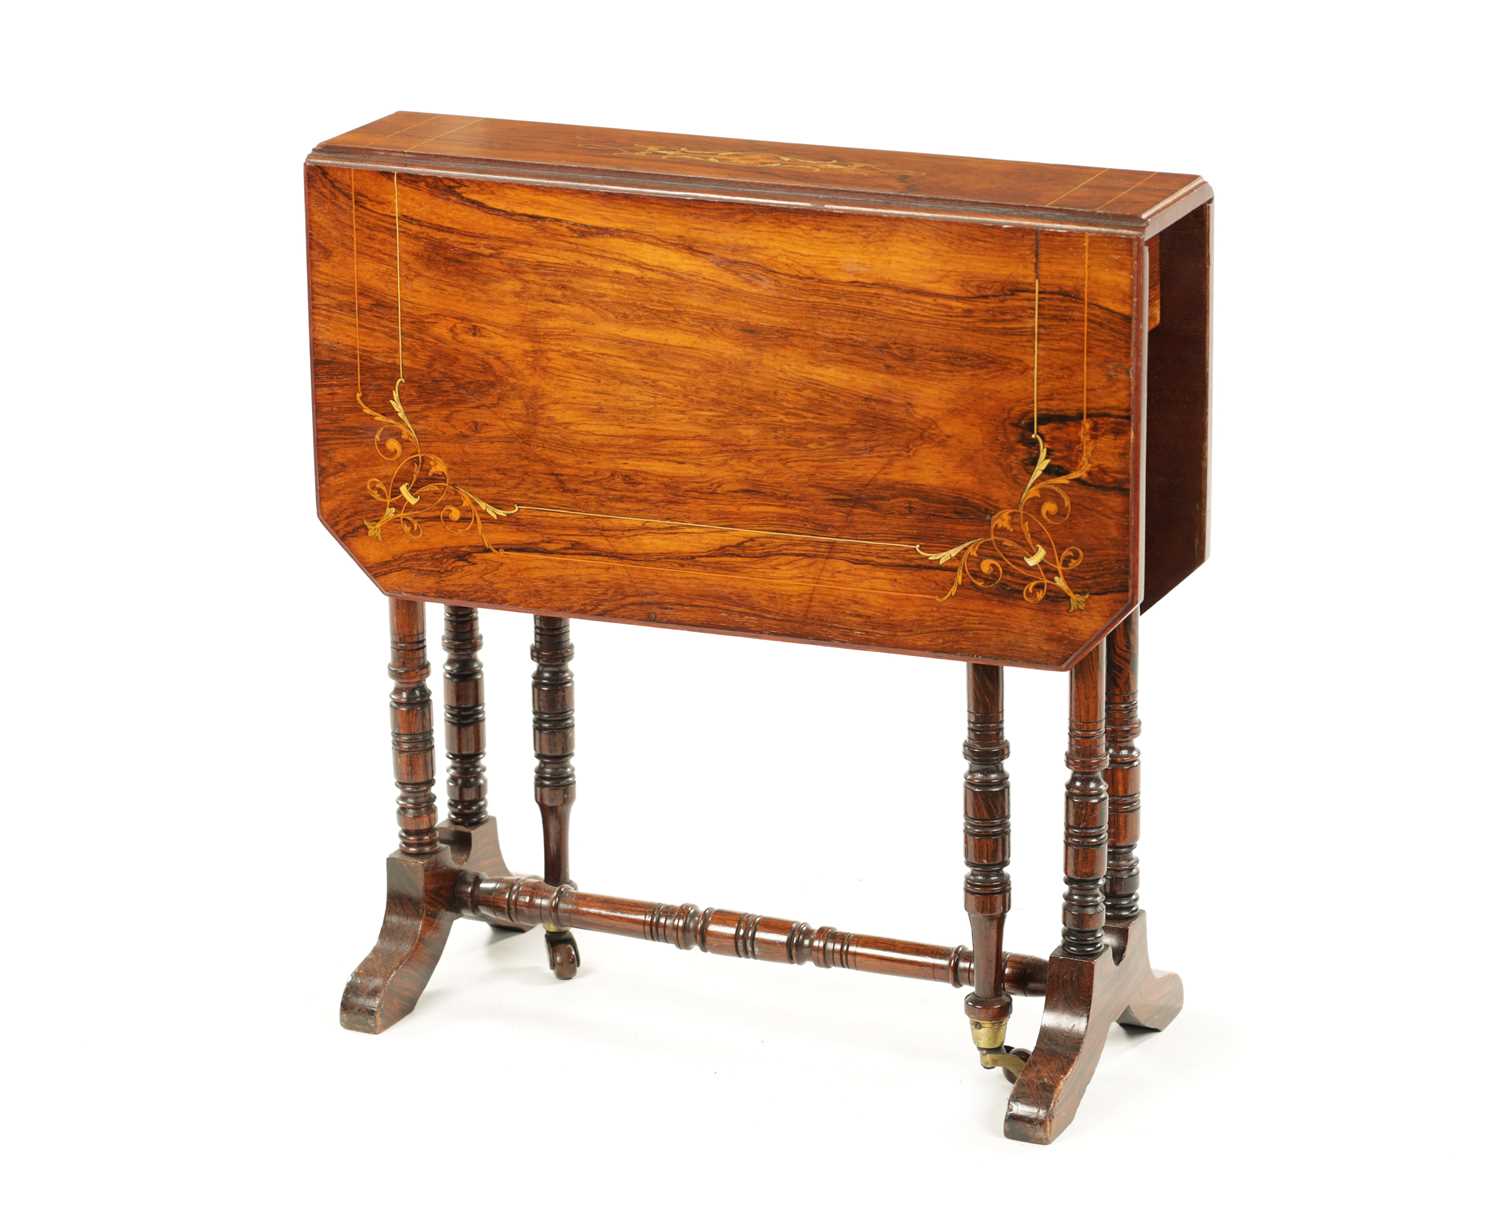 A 19TH CENTURY INLAID ROSEWOOD SUTHERLAND TABLE